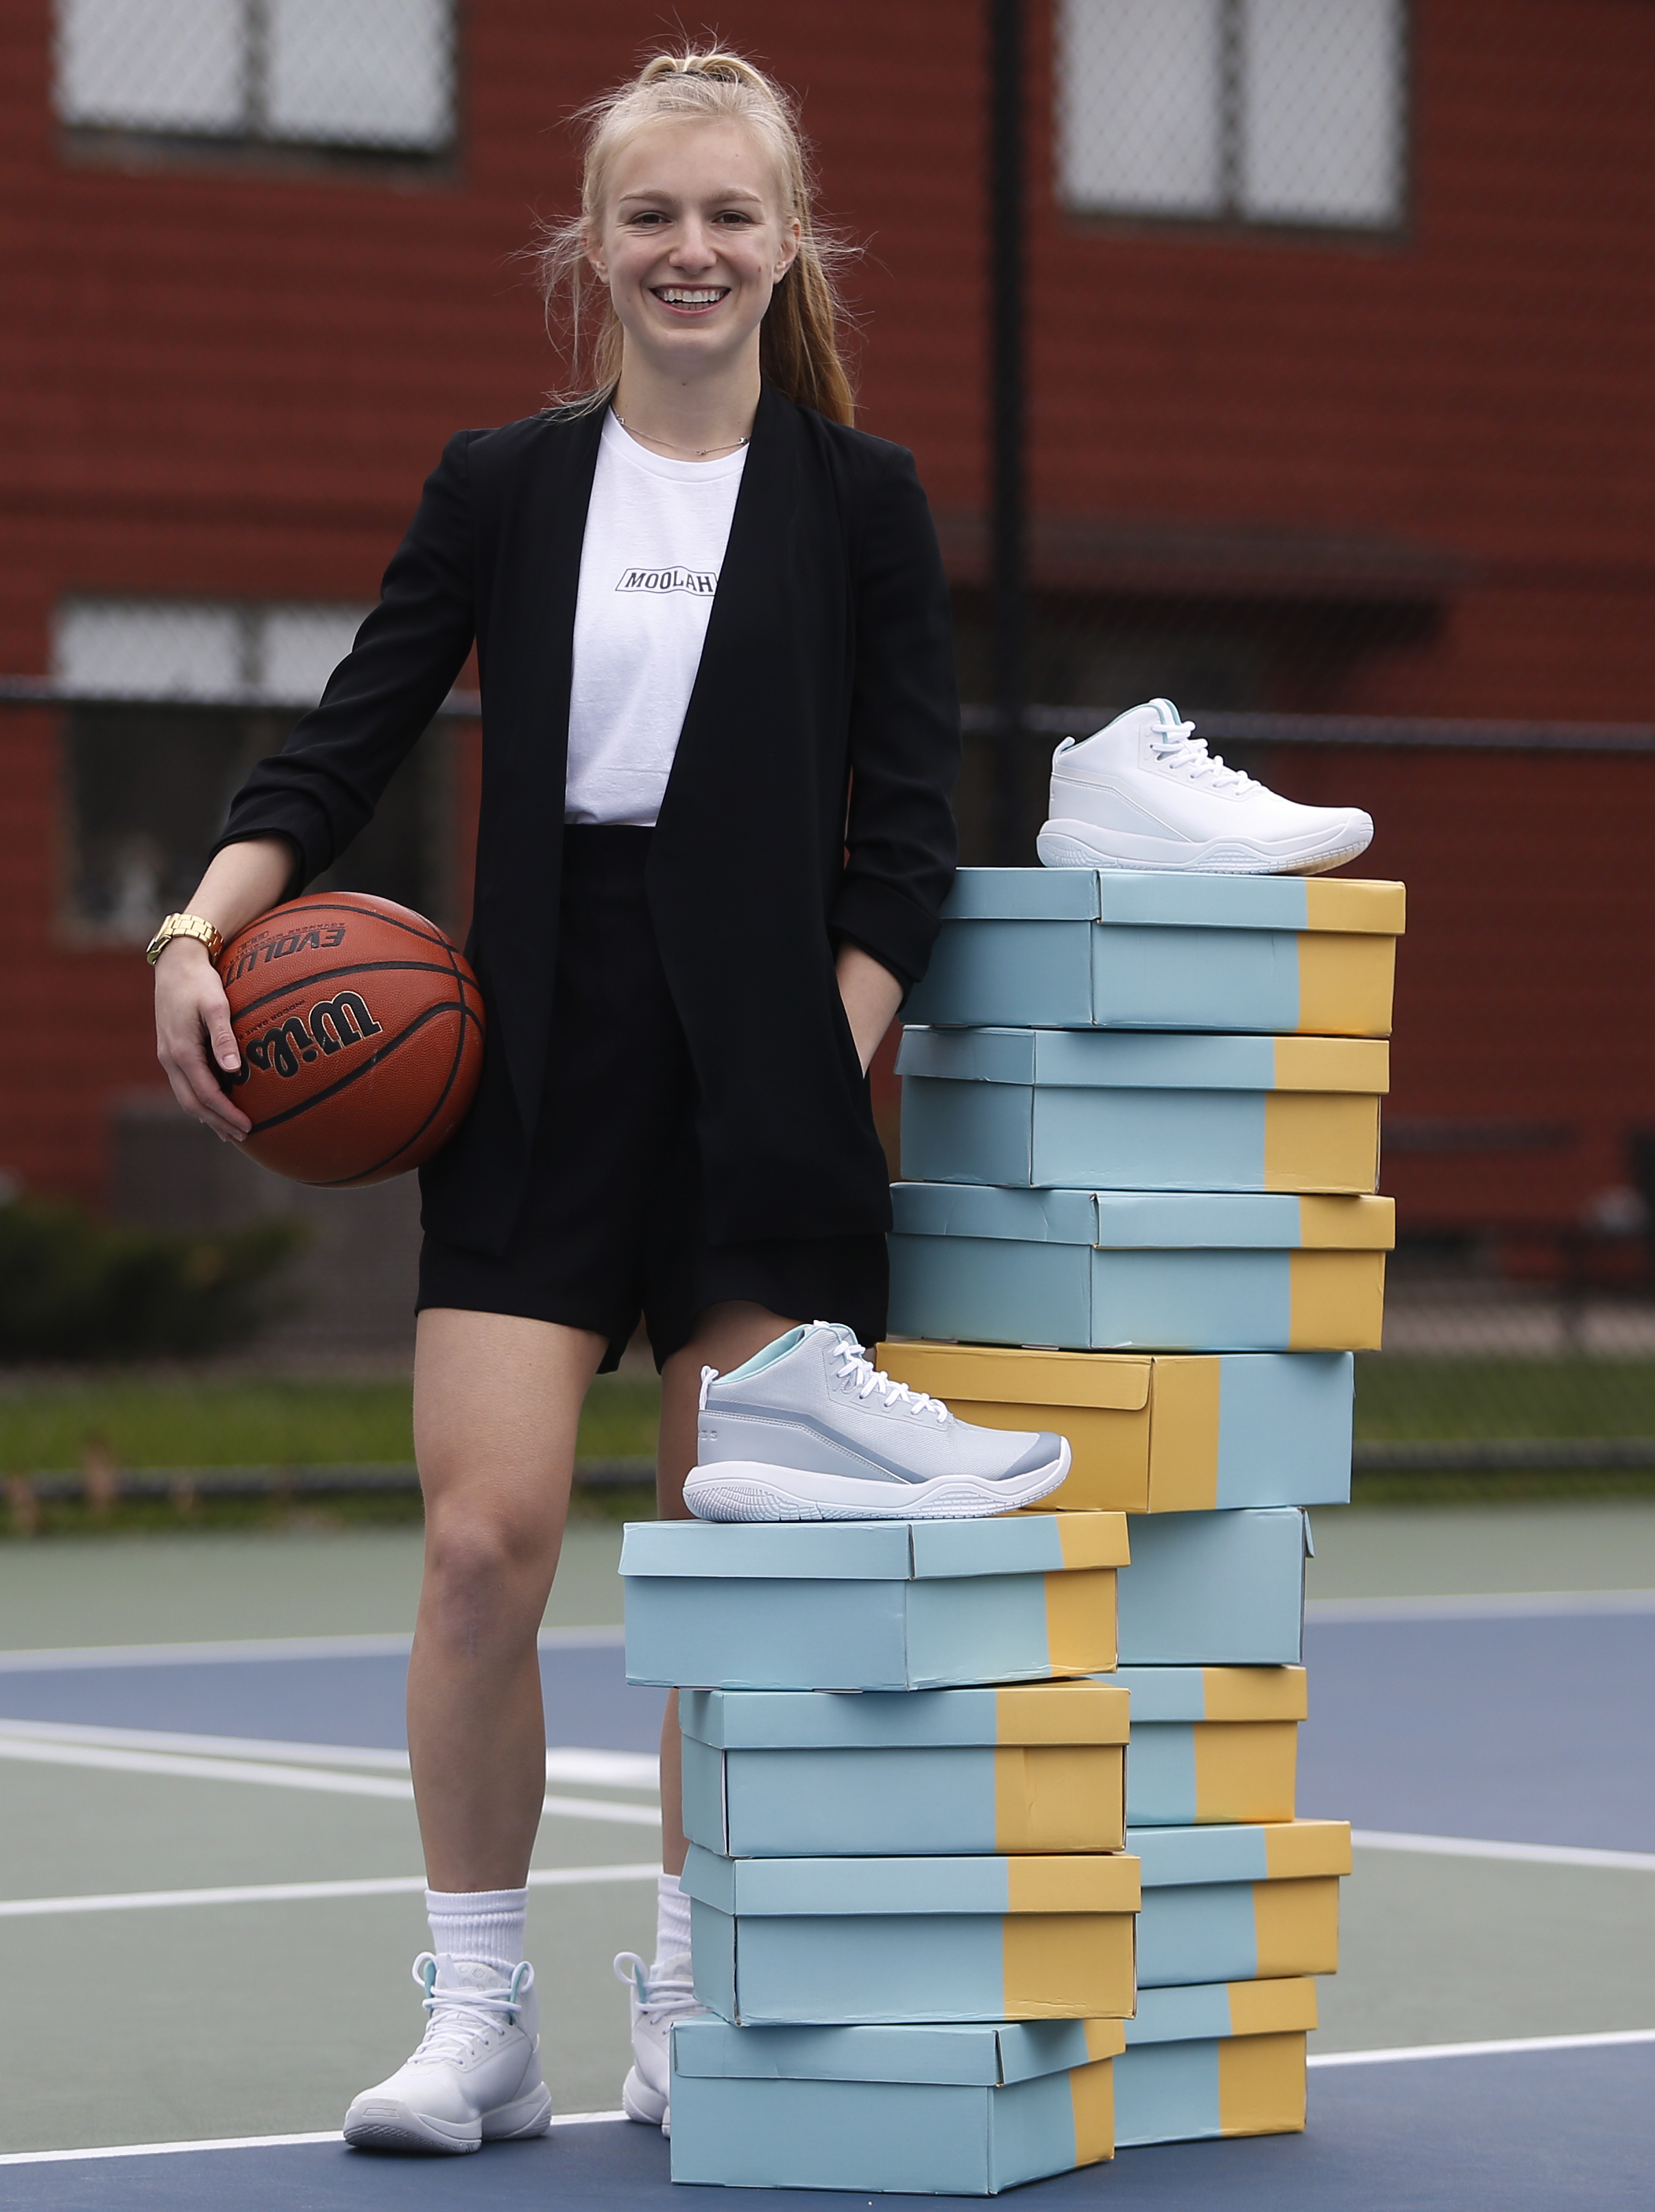 She was fed up with how women's basketball shoes were made. So she started  her own company. - The Boston Globe